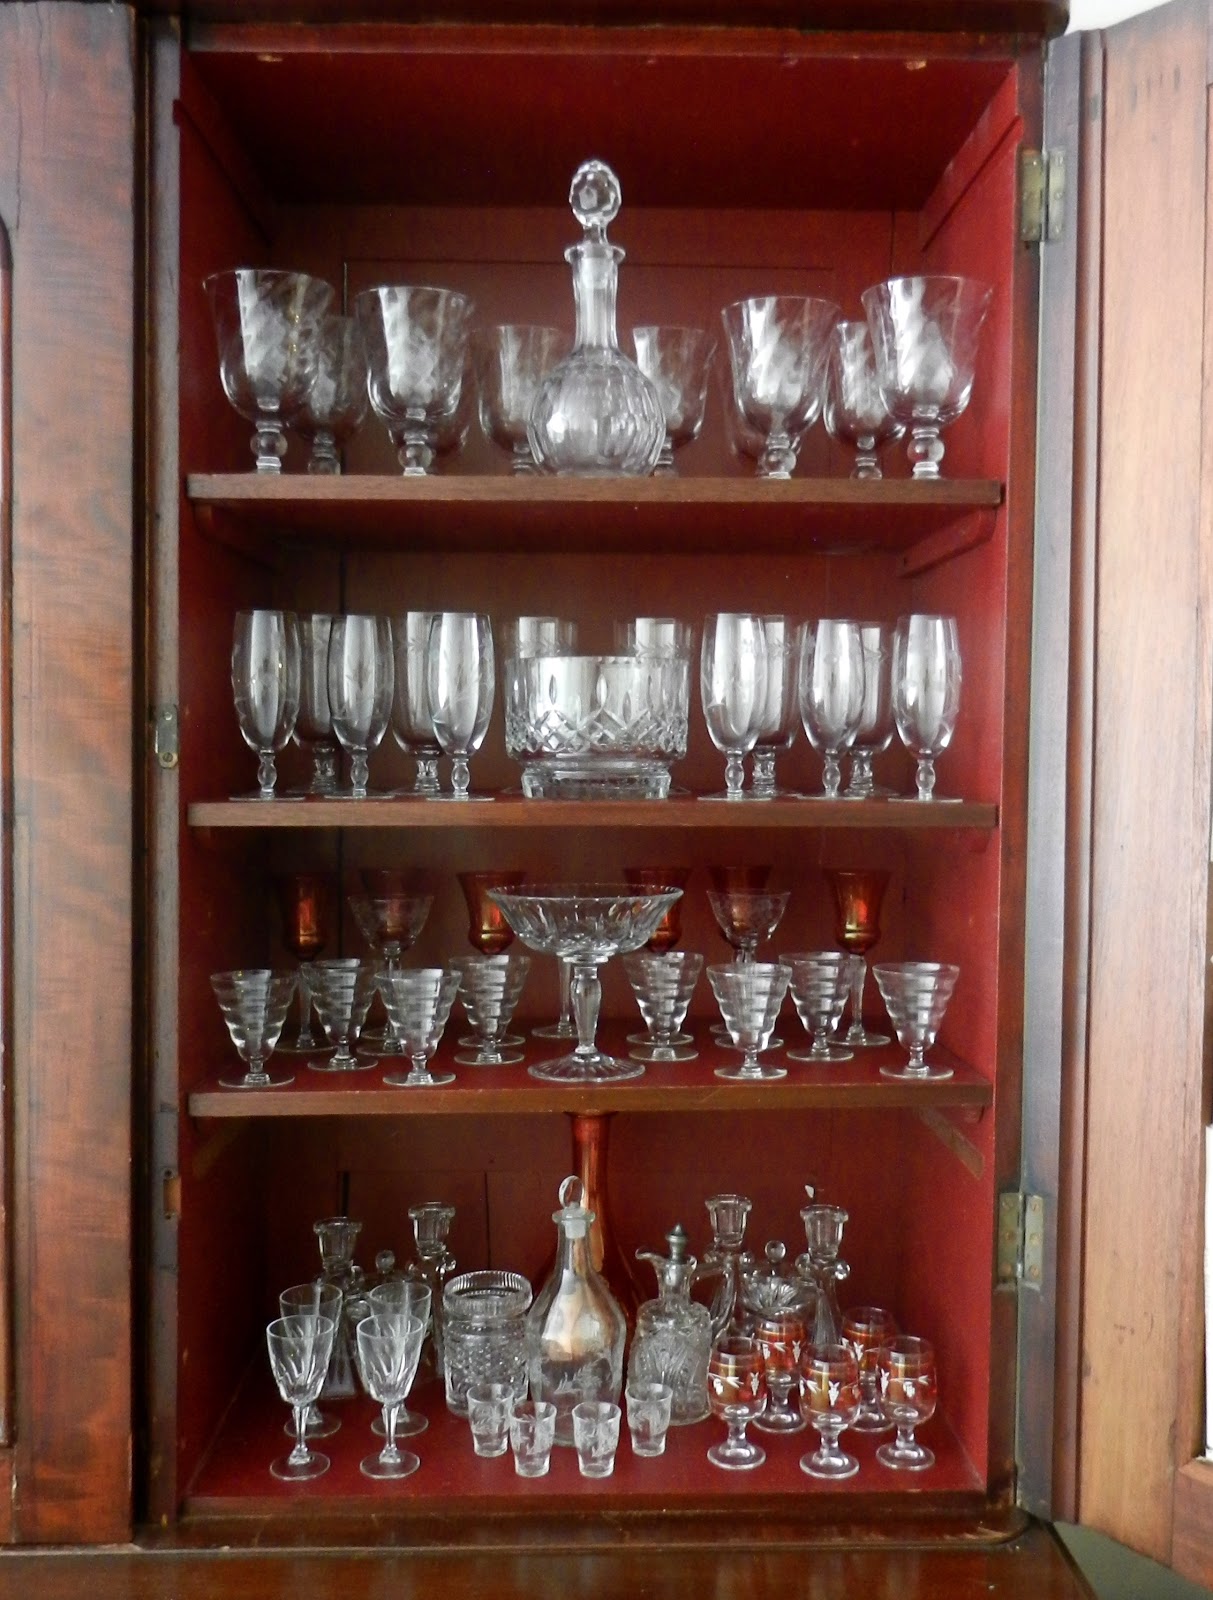 Knickerbocker Style And Design A Cabinet Of Vintage Glassware